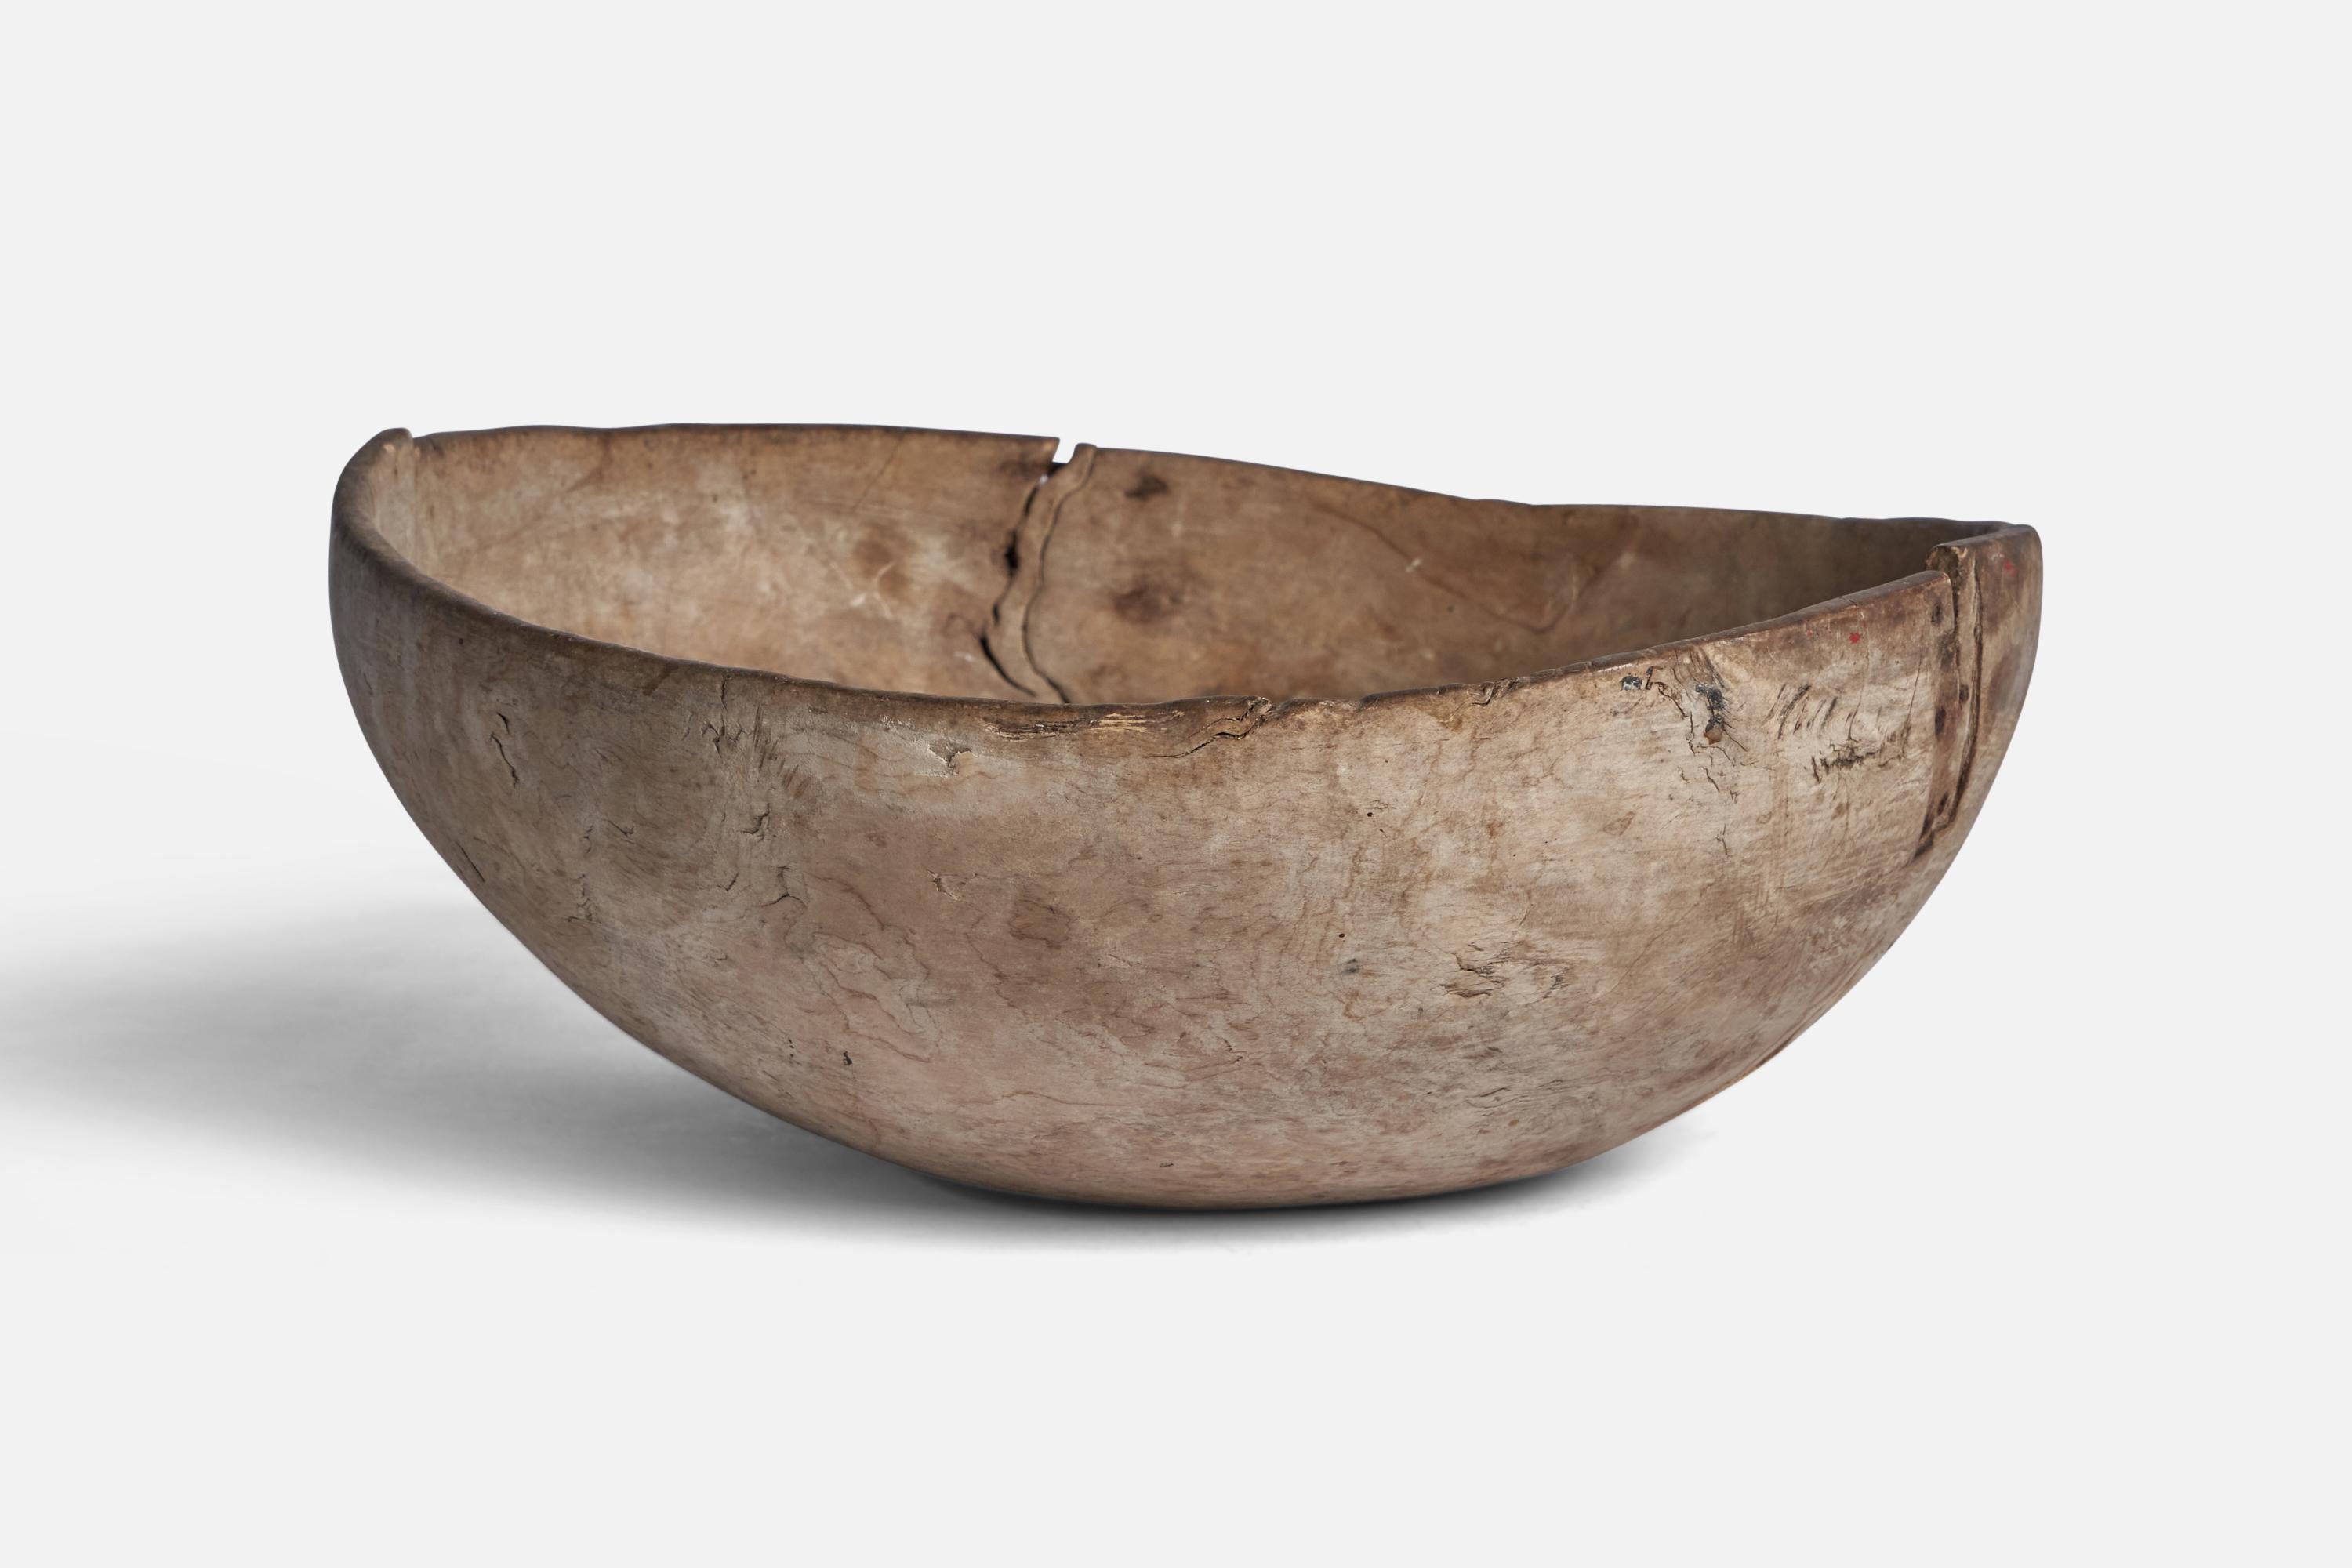 A wood bowl with metal repair produced in Sweden, 1782.